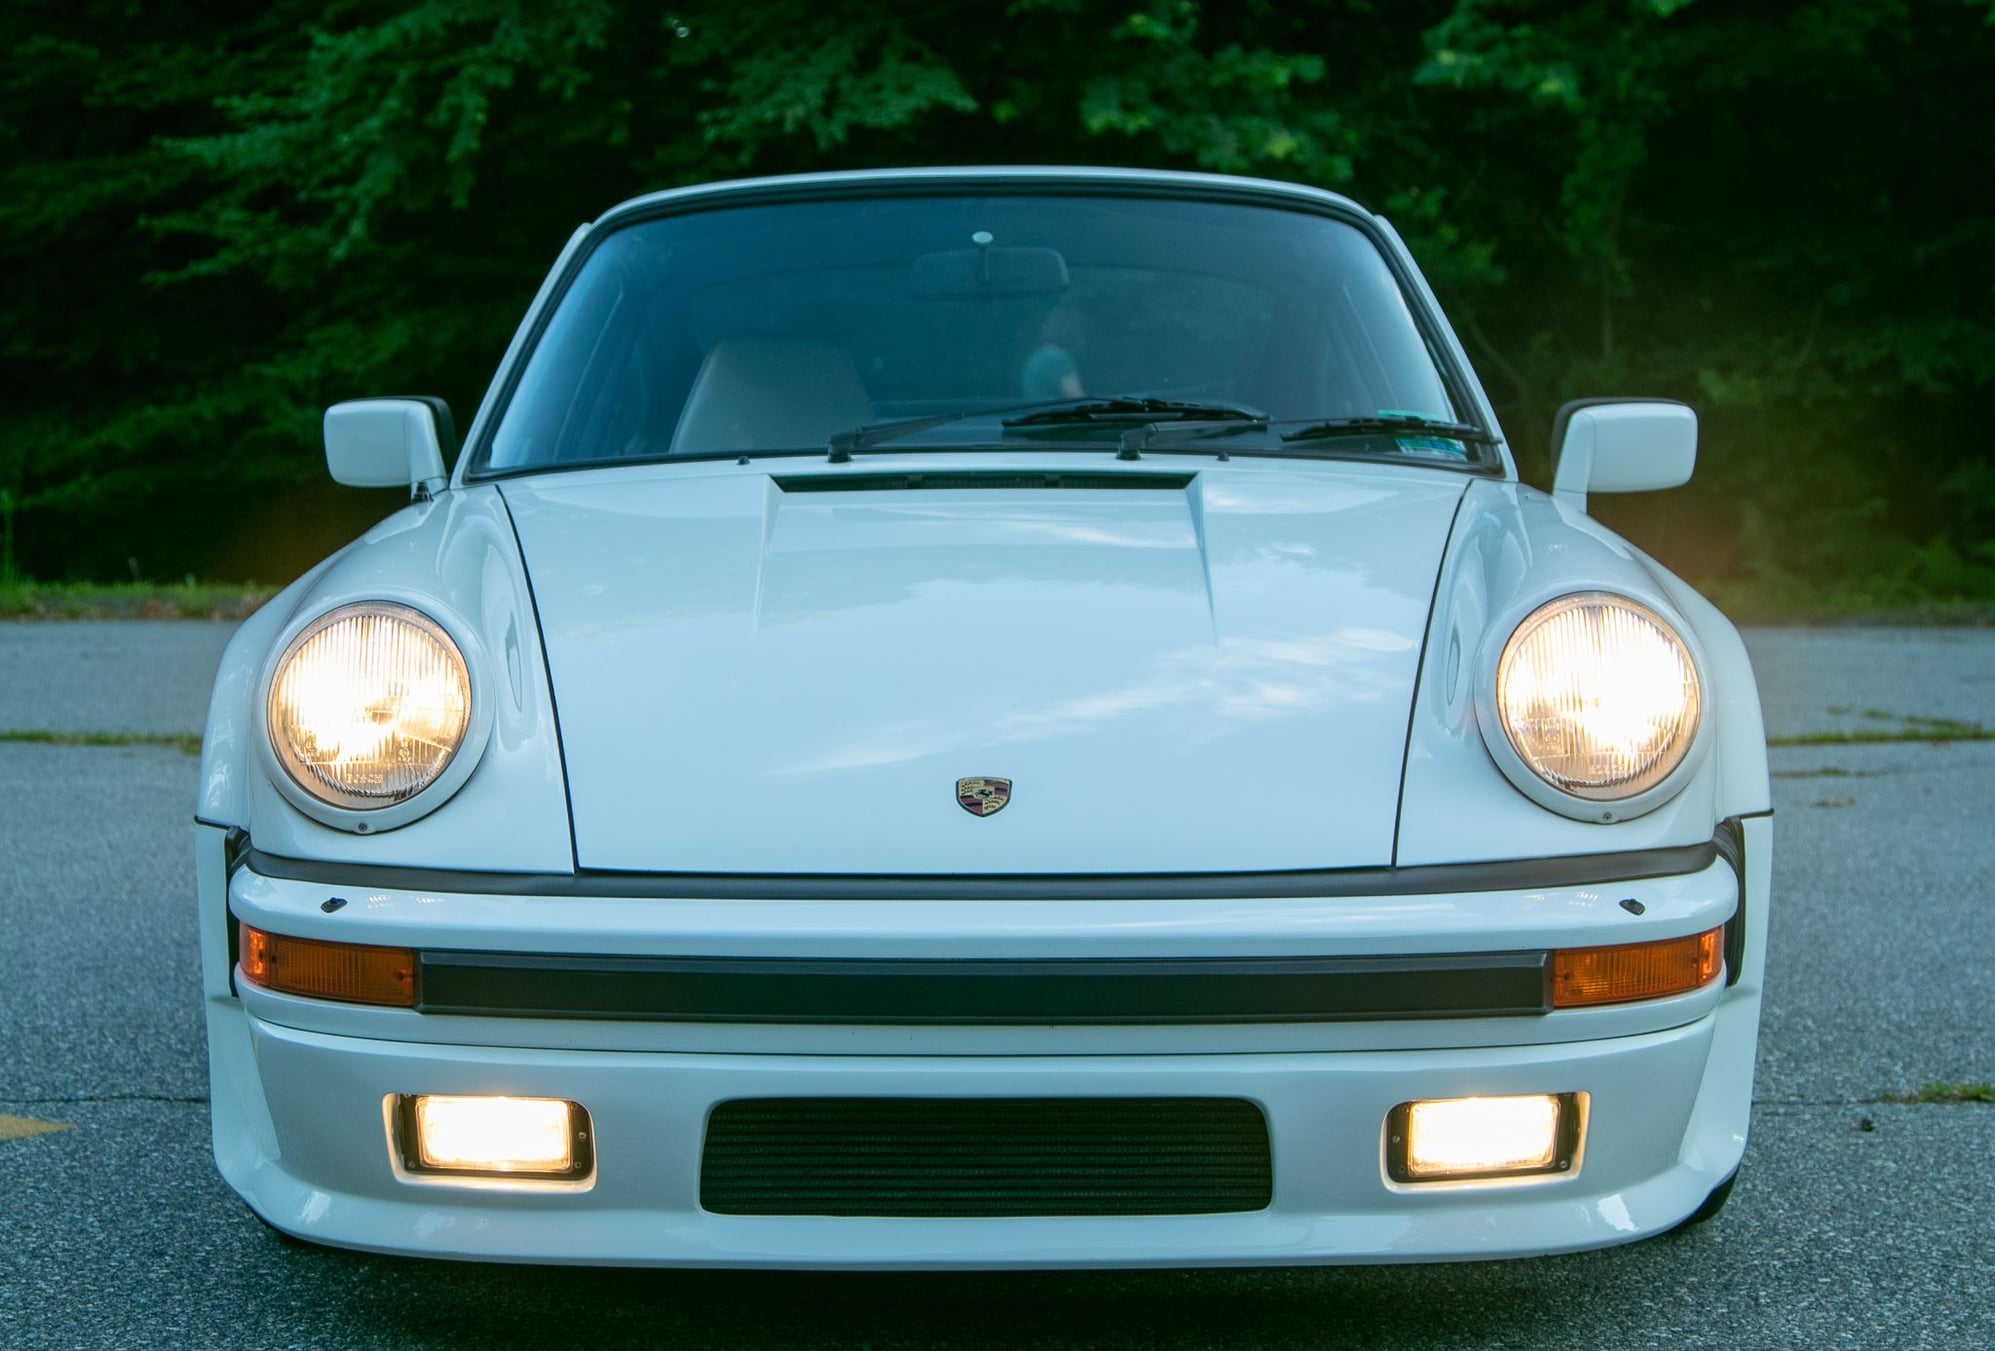 1984 Porsche 911 - 1984 Porsche 911 Turbo "S" Special Wishes Program car - Used - VIN wp0zzz93zes000361 - 28,956 Miles - 6 cyl - 2WD - Manual - Coupe - White - Colchester, CT 06415, United States